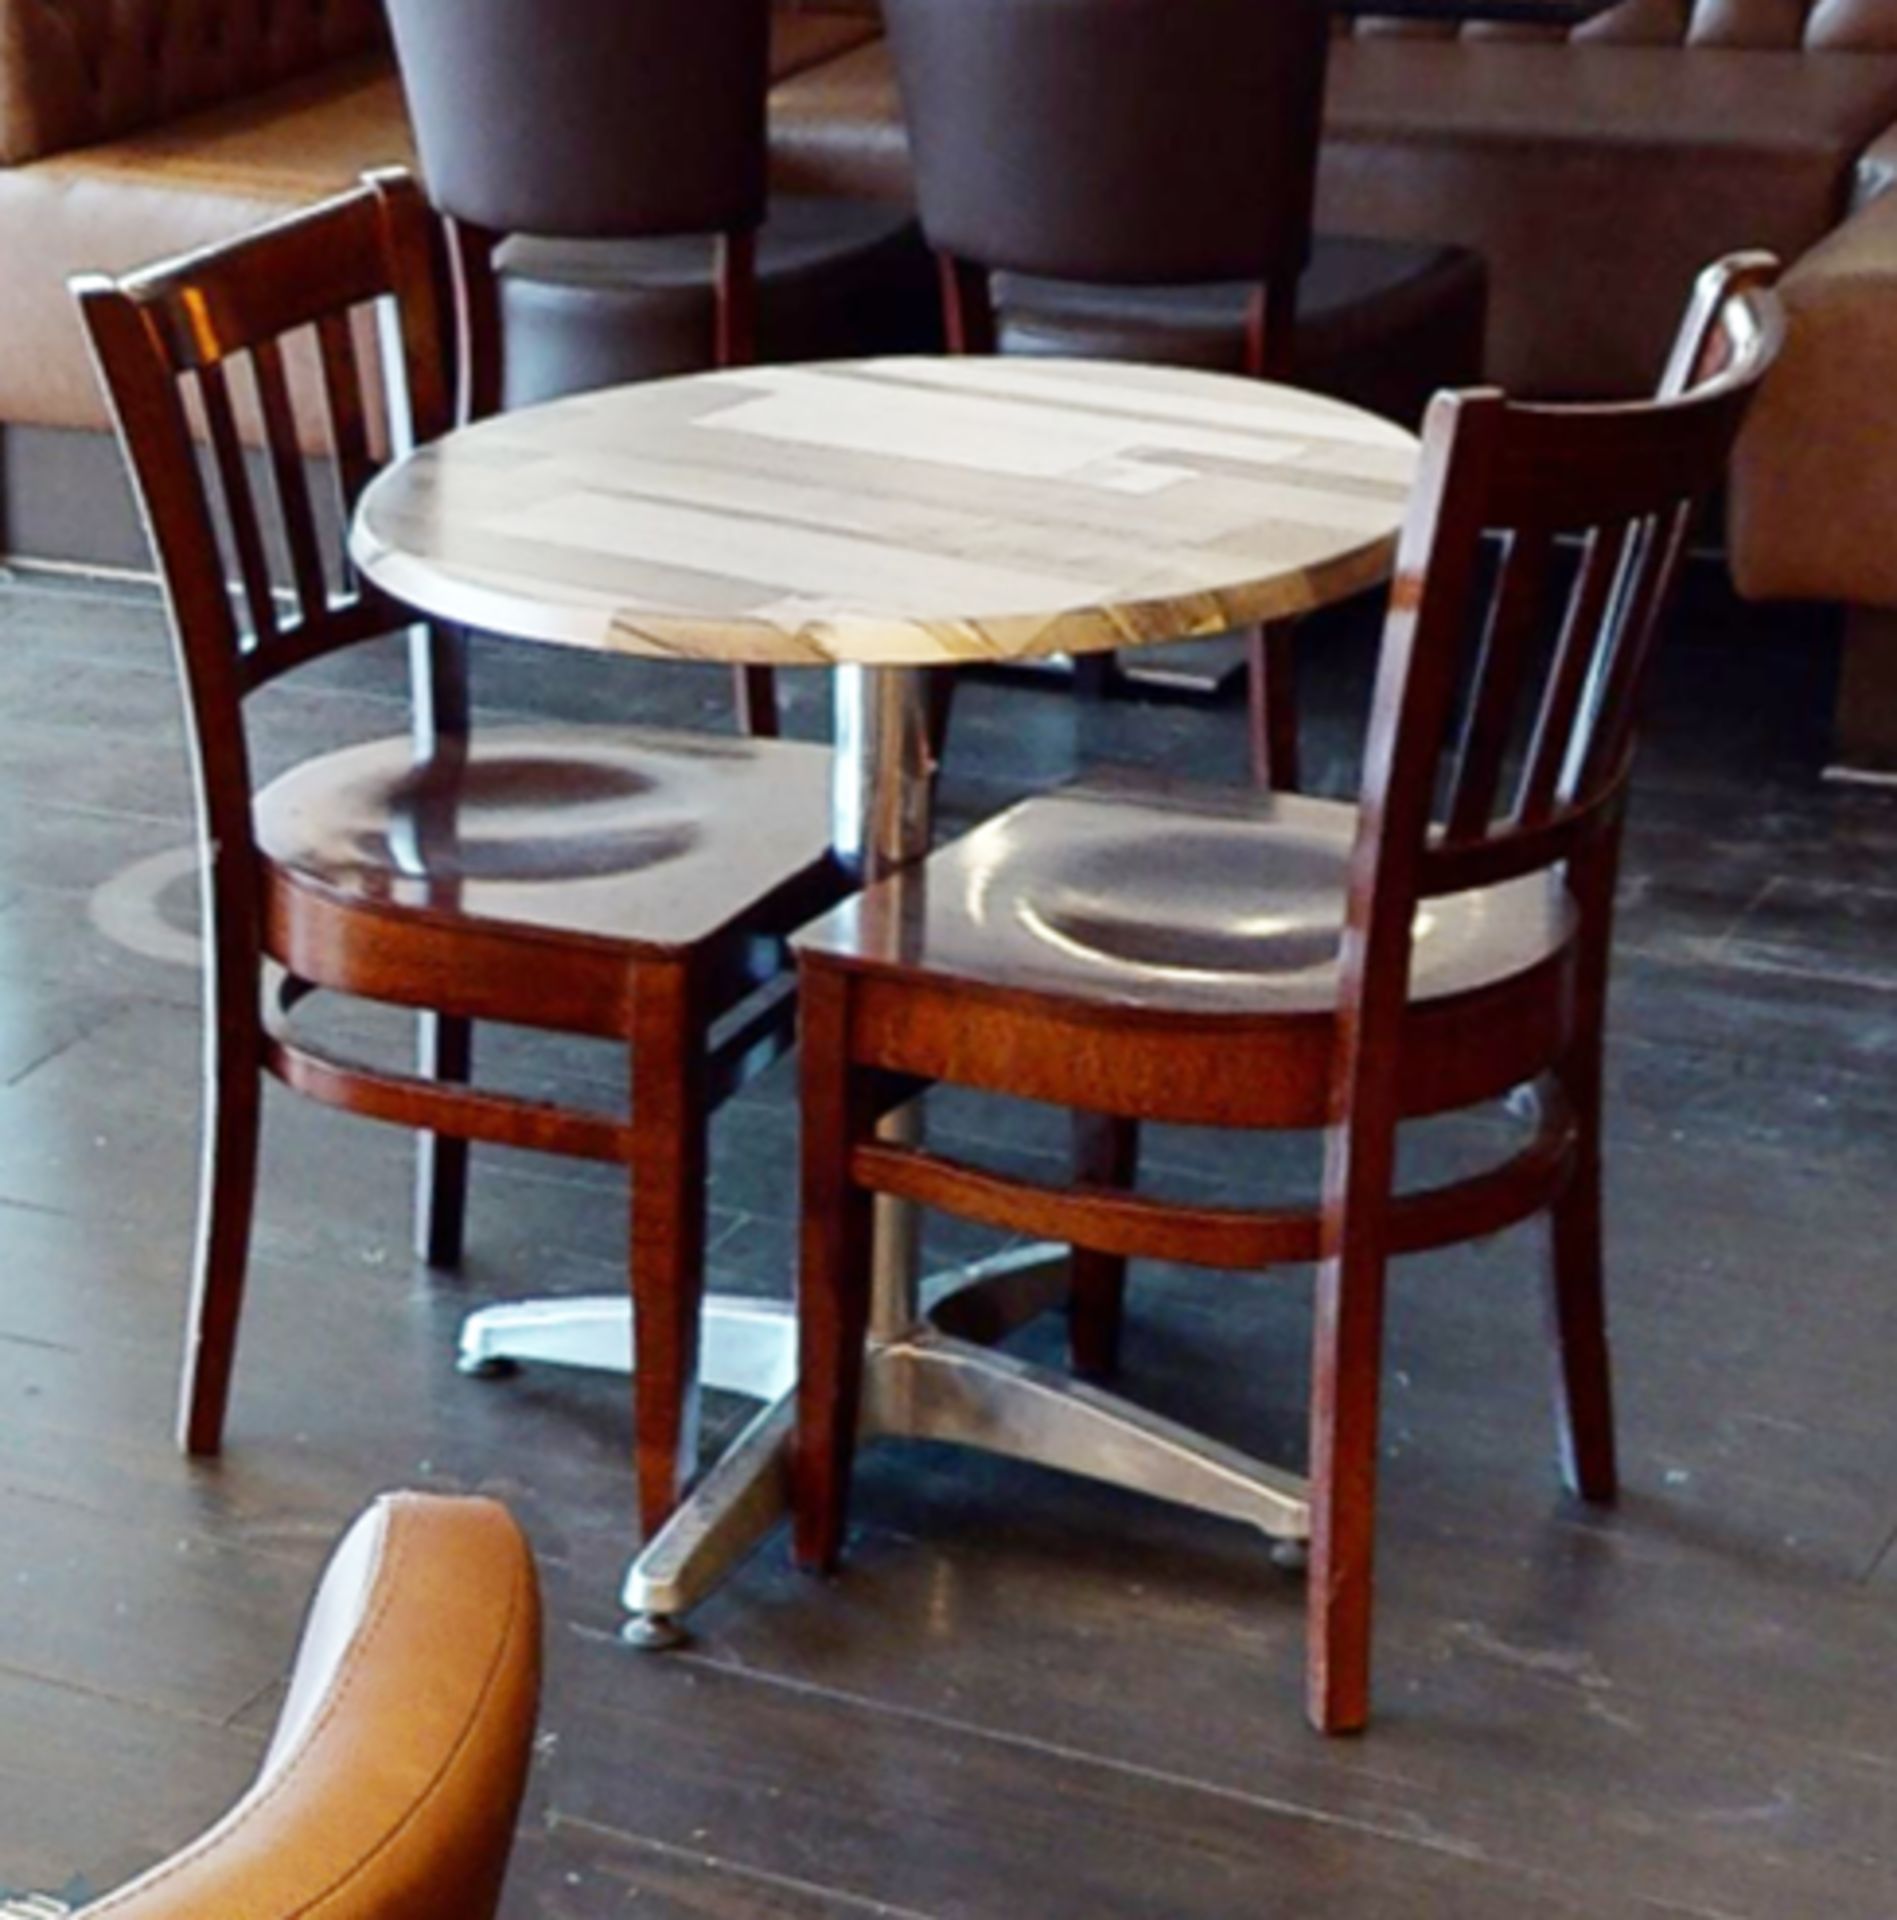 10 x Two Seater Restaurant Tables With Wood Panel Effect Tops and Chromes Bases - CL701 - - Image 9 of 9